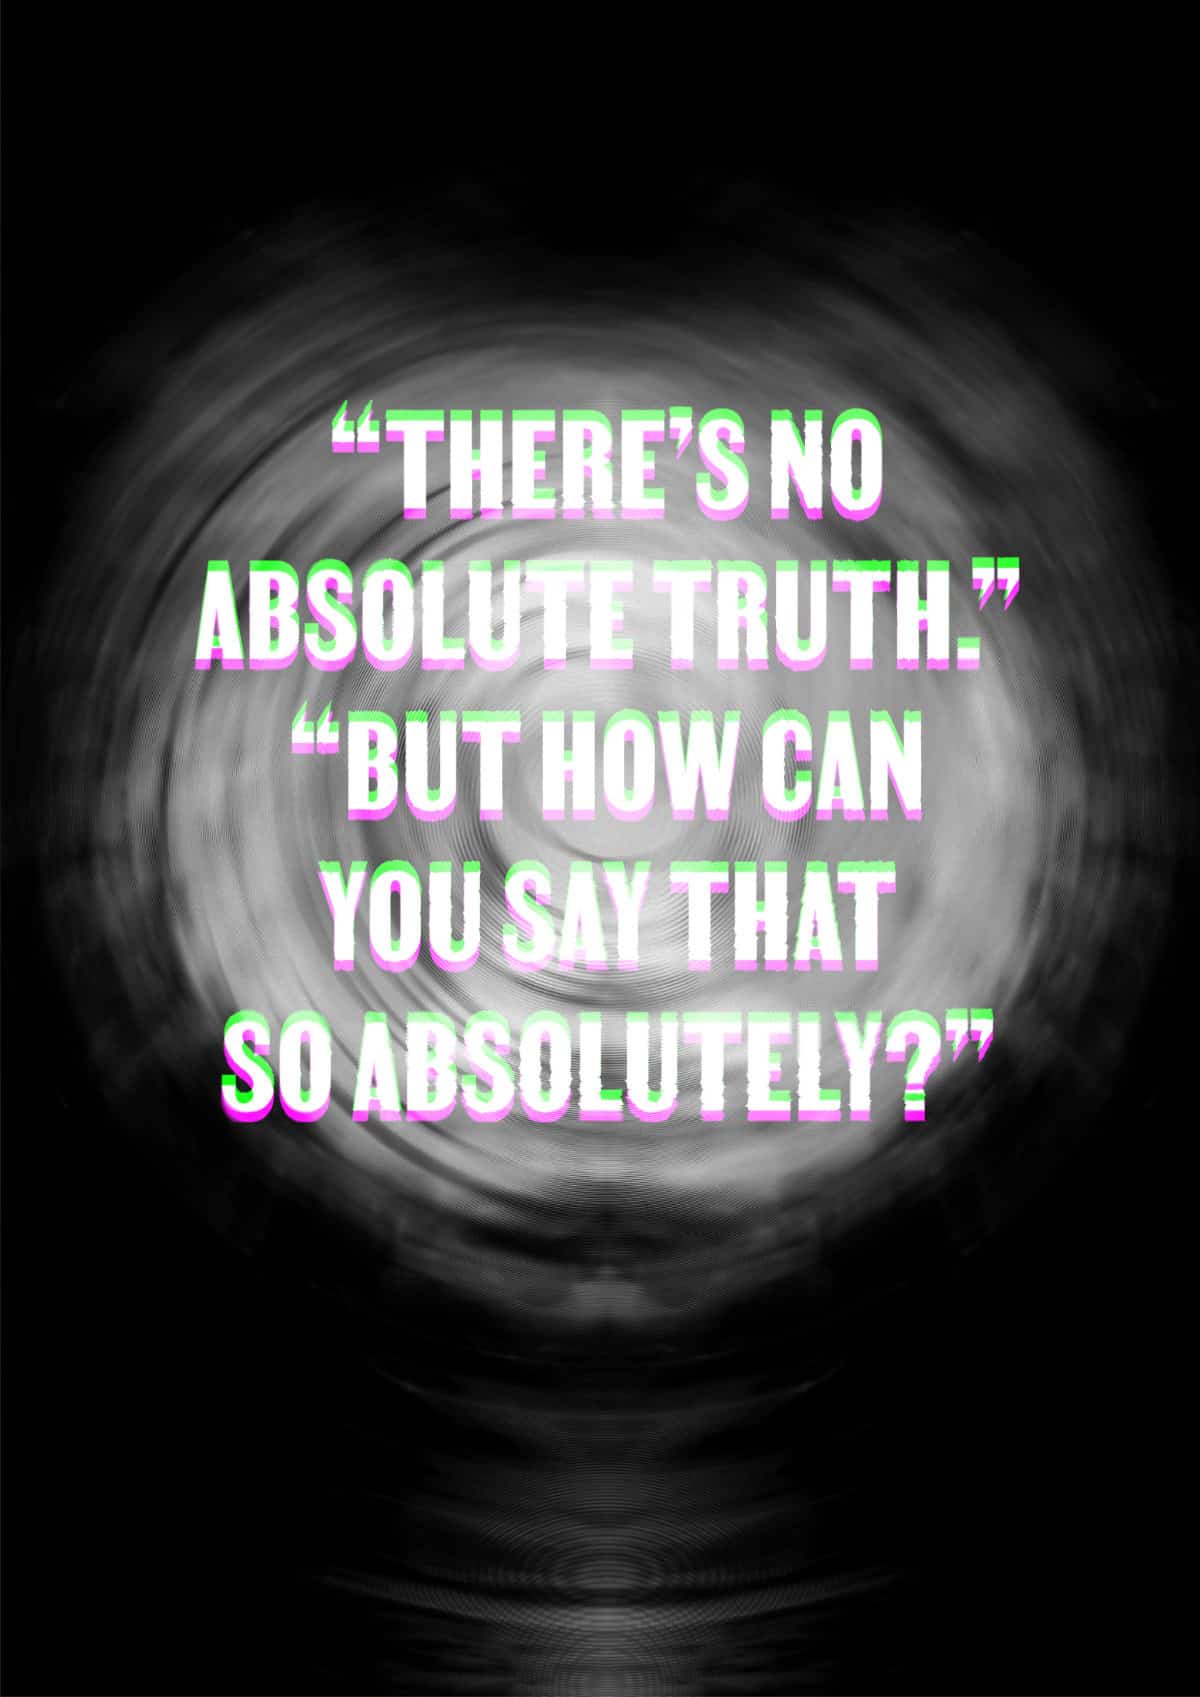 Michael Leonhartsberger: Typo-Poster: There is no absolute Truth. But how can you say that so absolutely?